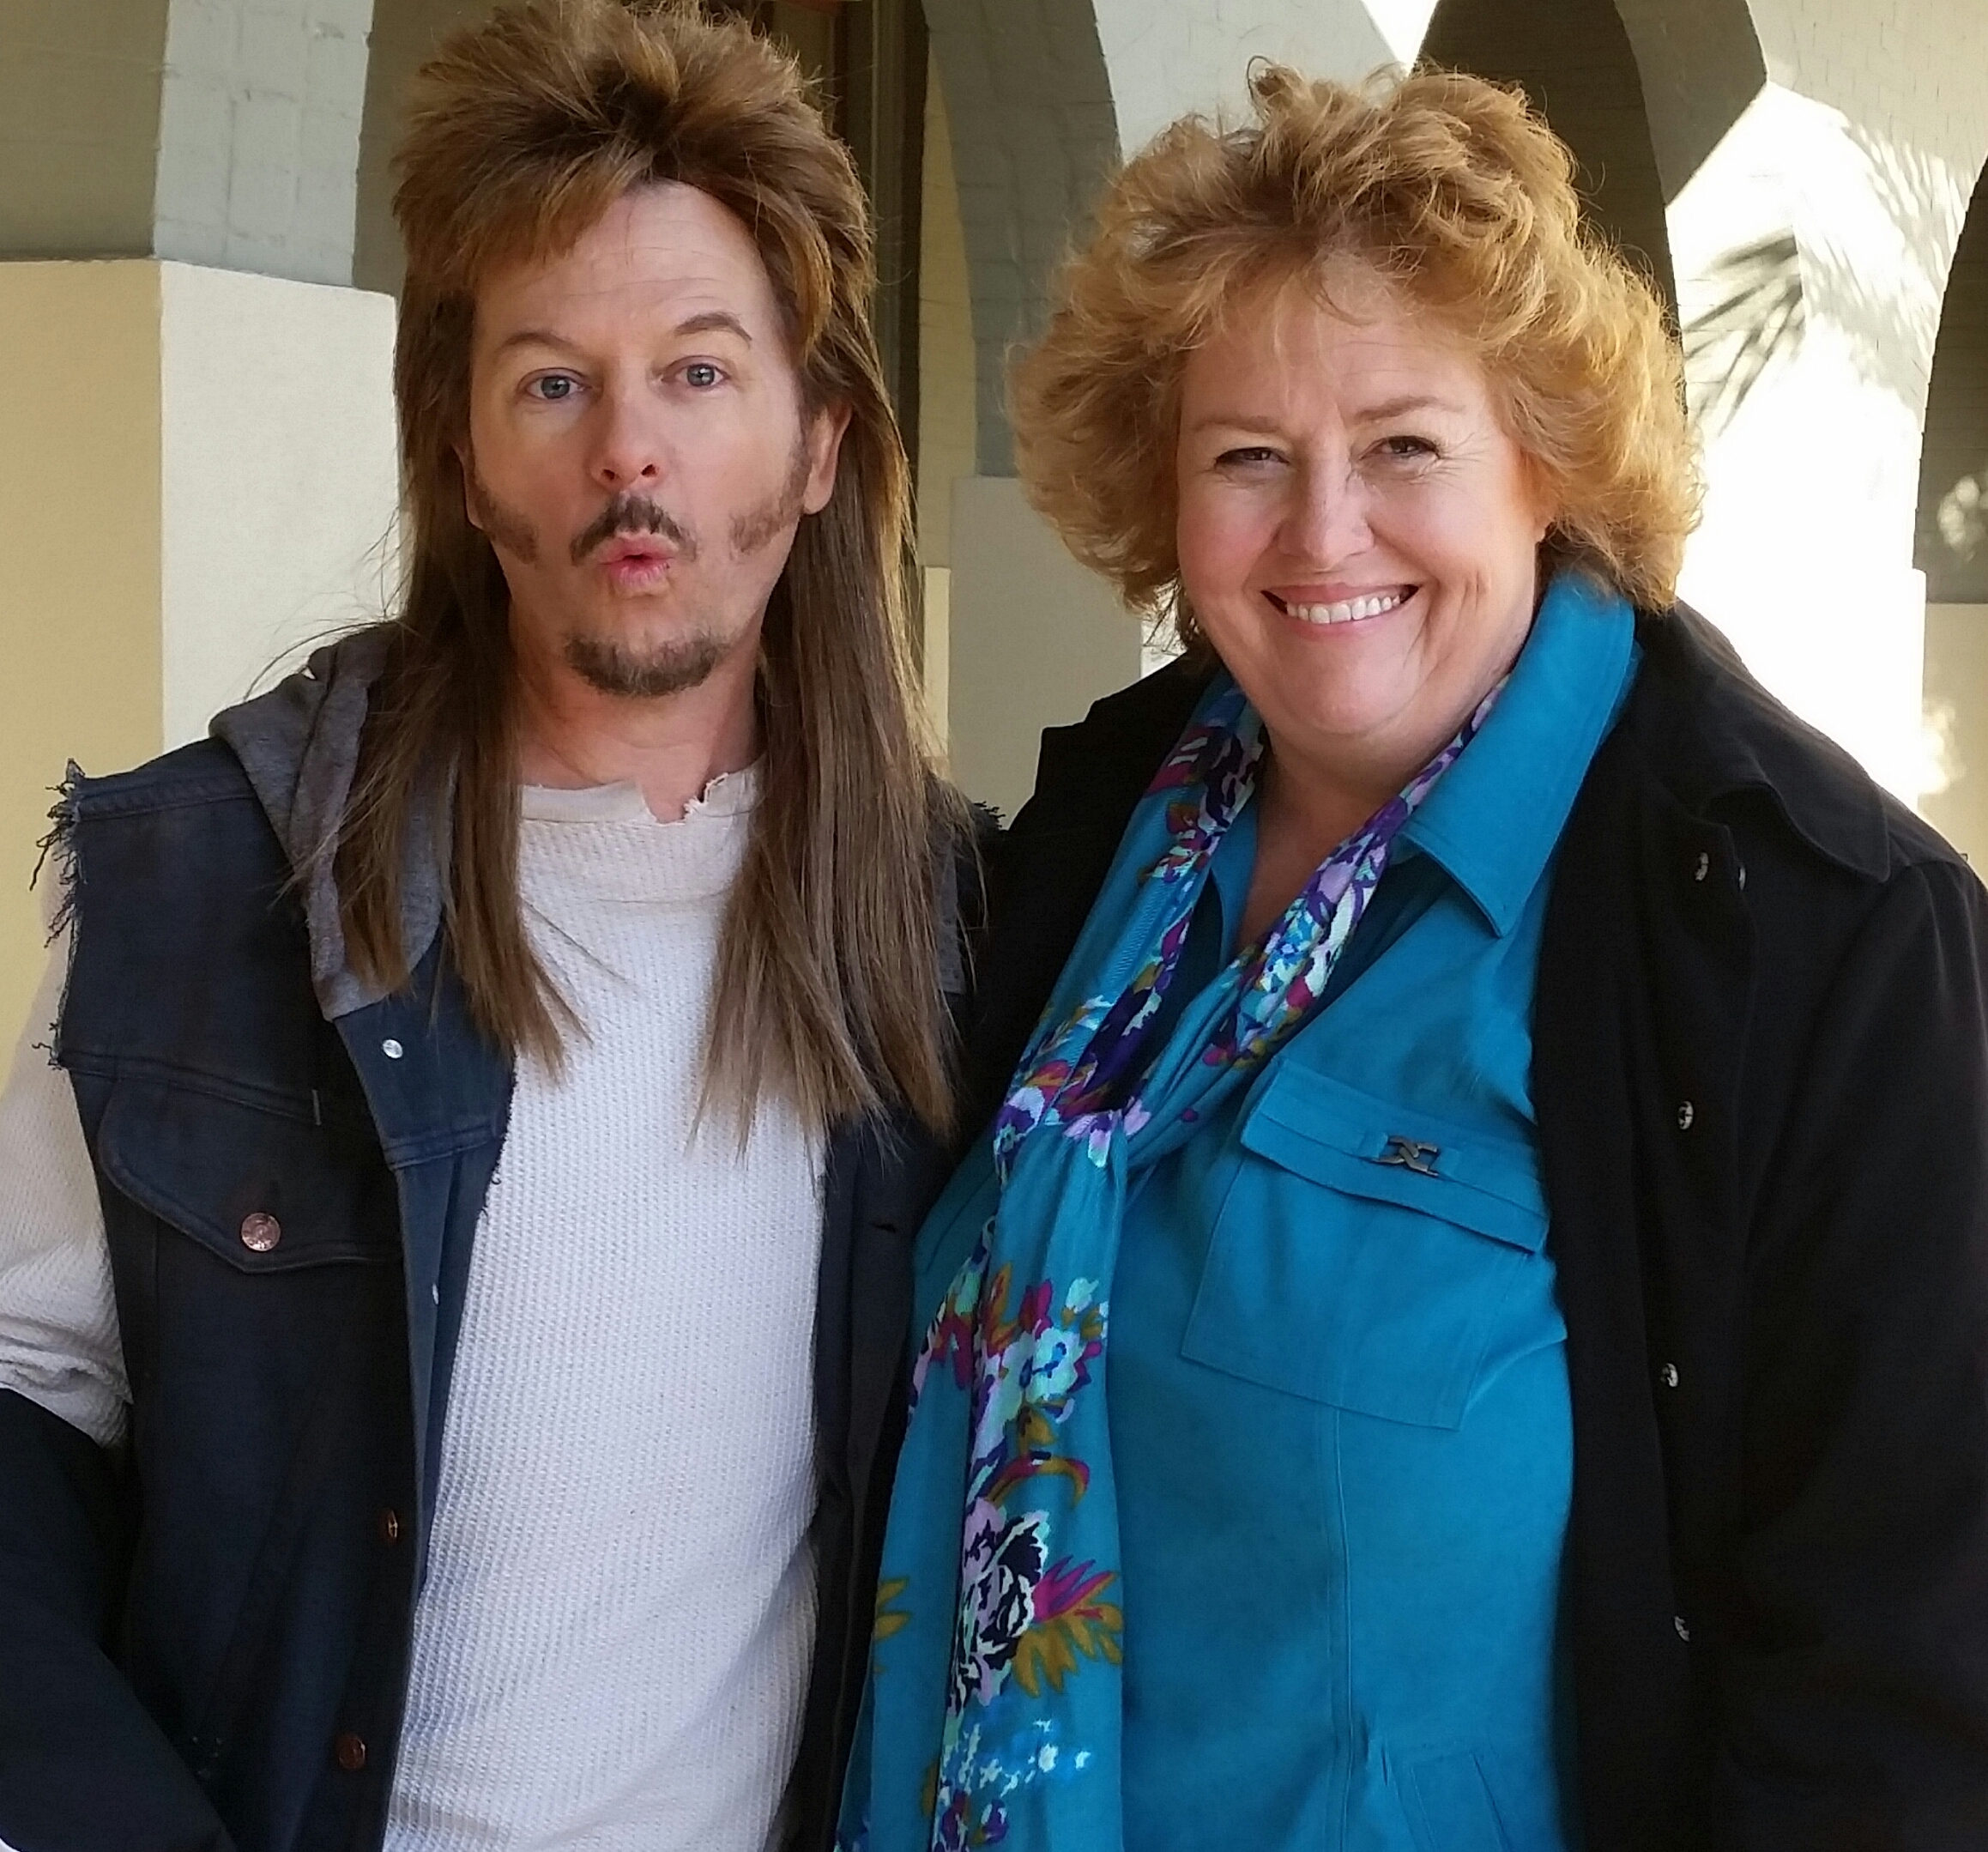 Tracy Weisert & David Spade in New Orleans on the set of JOE DIRT 2, Day 1 of shooting November 17, 2014.